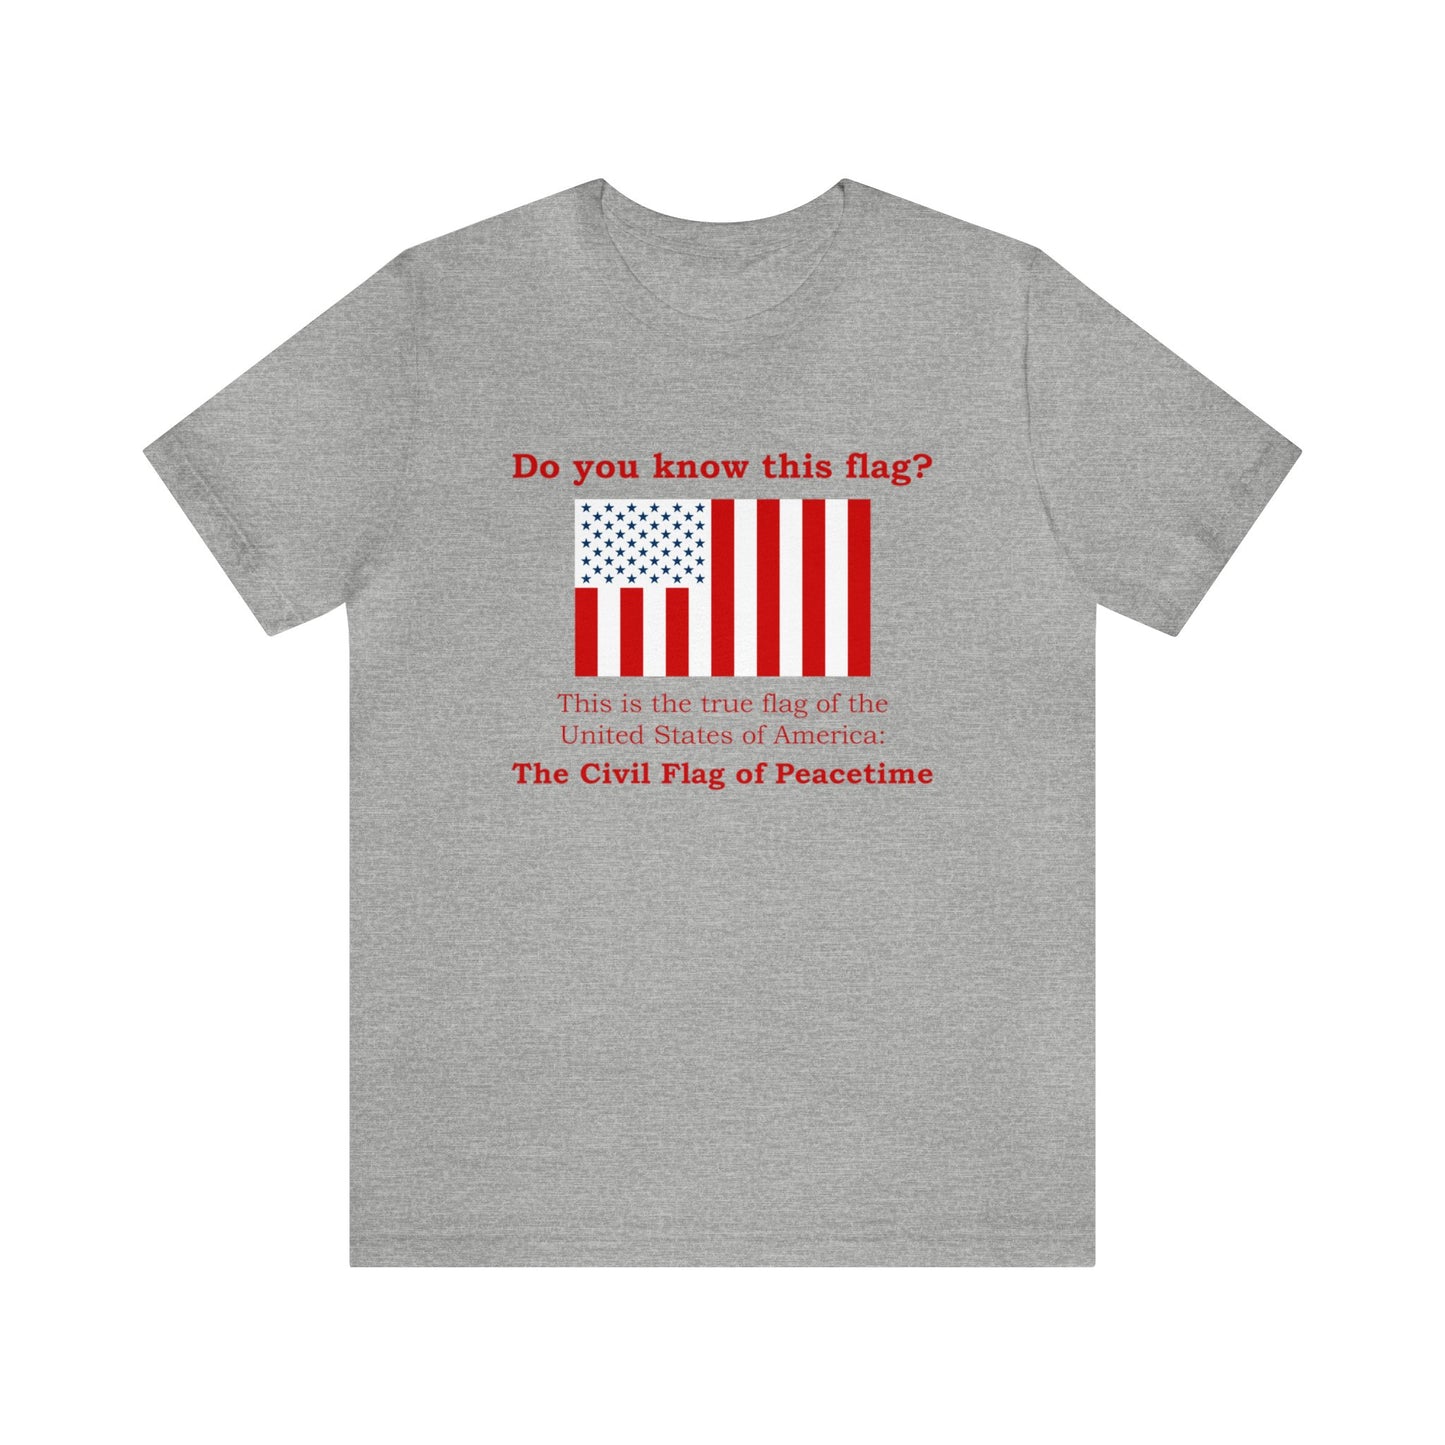 Do you know this flag (Civil Peace)? Tee